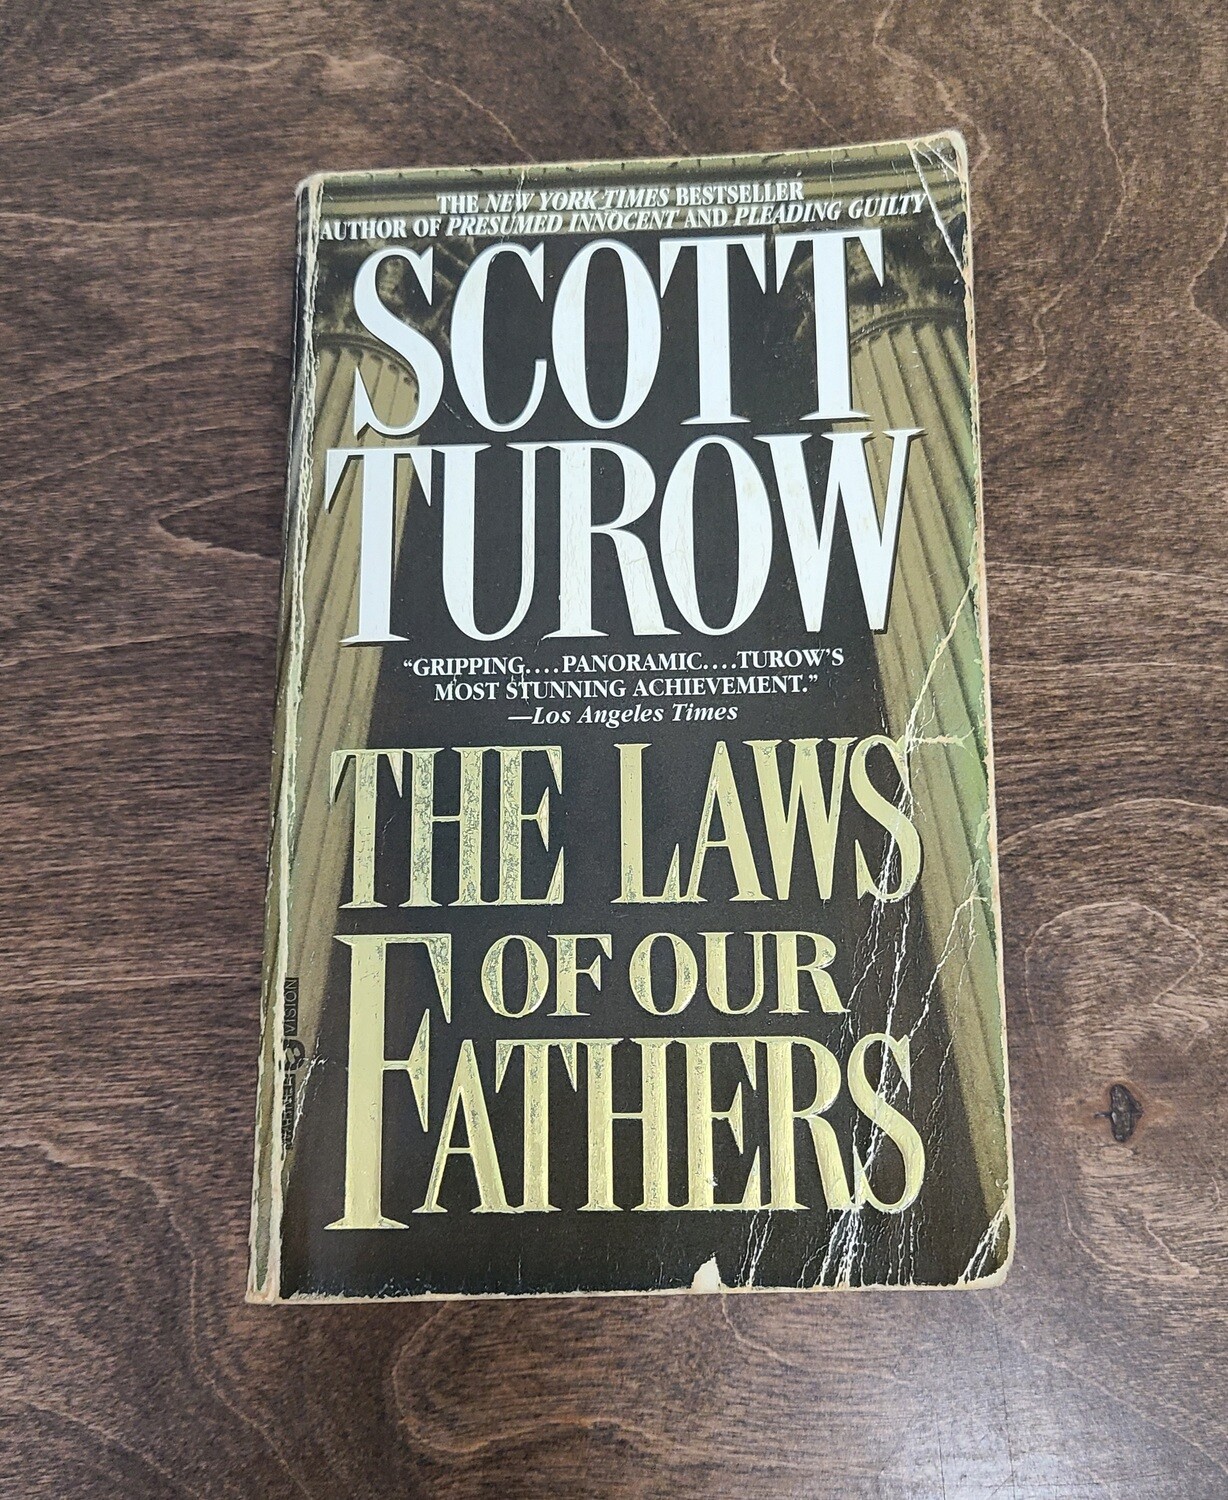 The Laws of Our Fathers by Scott Turow - Paperback